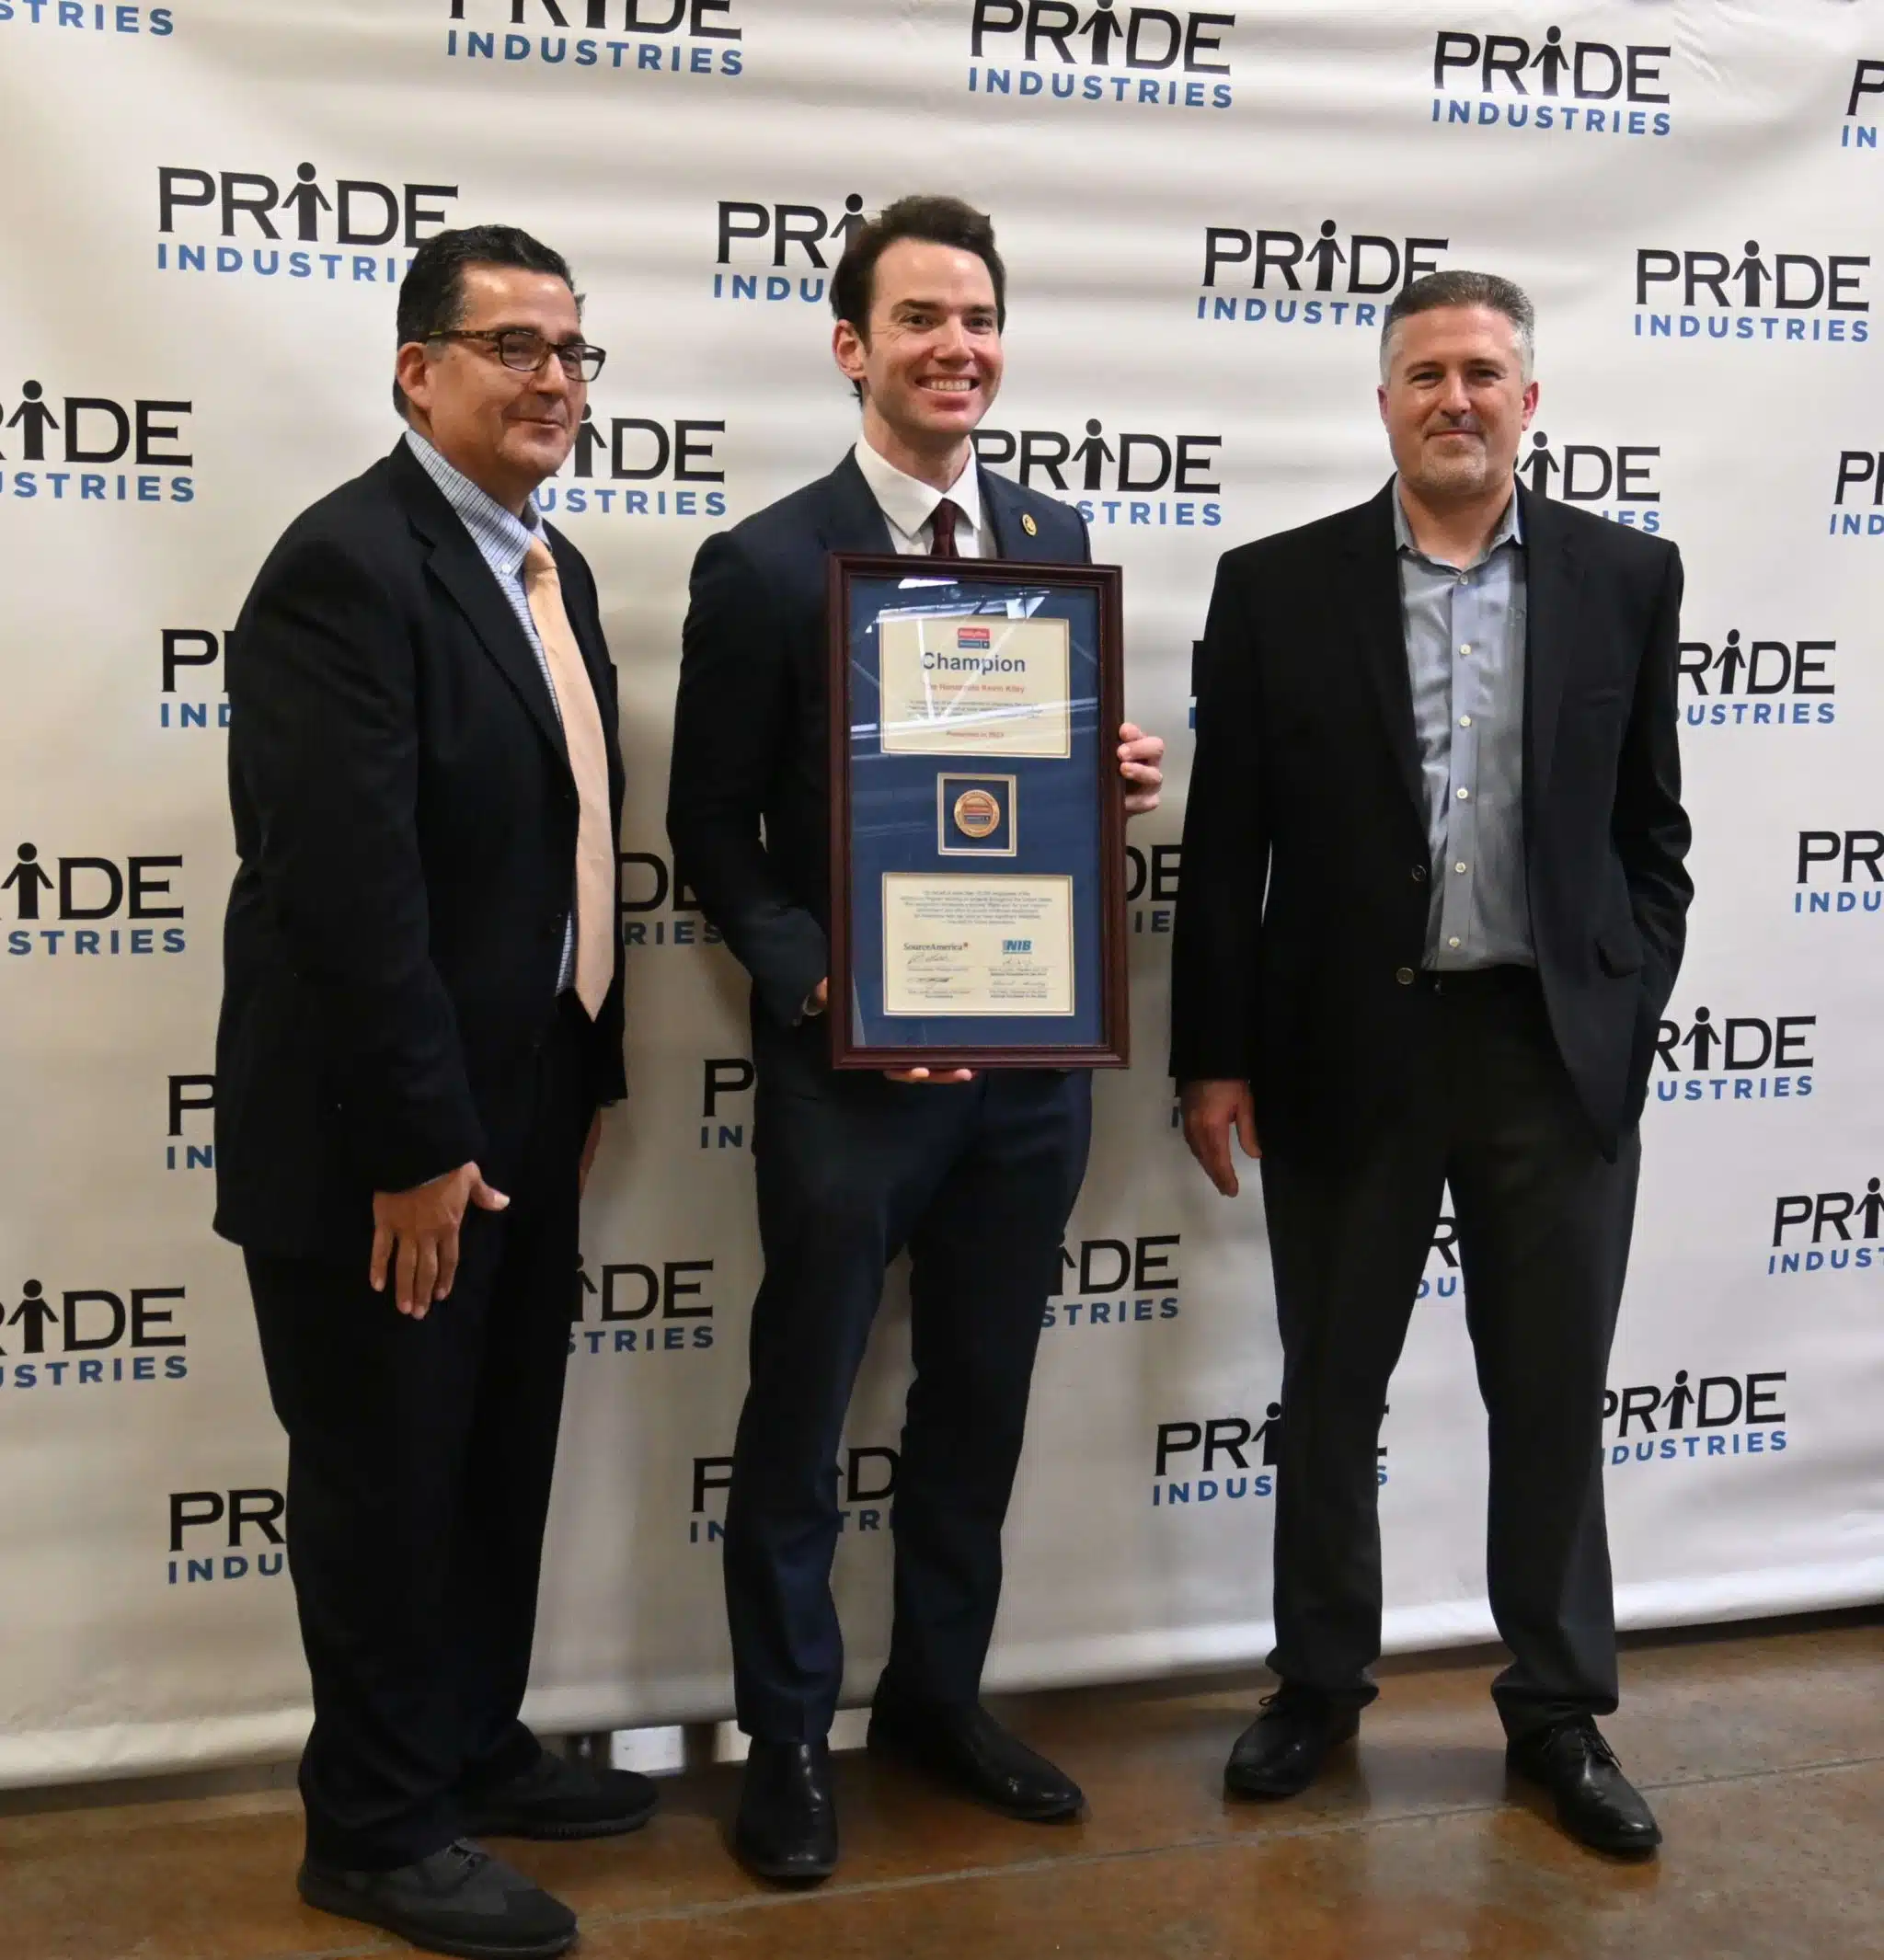 Rick Terrazas, Vice President of Government Affairs at SourceAmerica, Congressman Kevin Kiley, Jeff Dern, CEO at PRIDE Industries